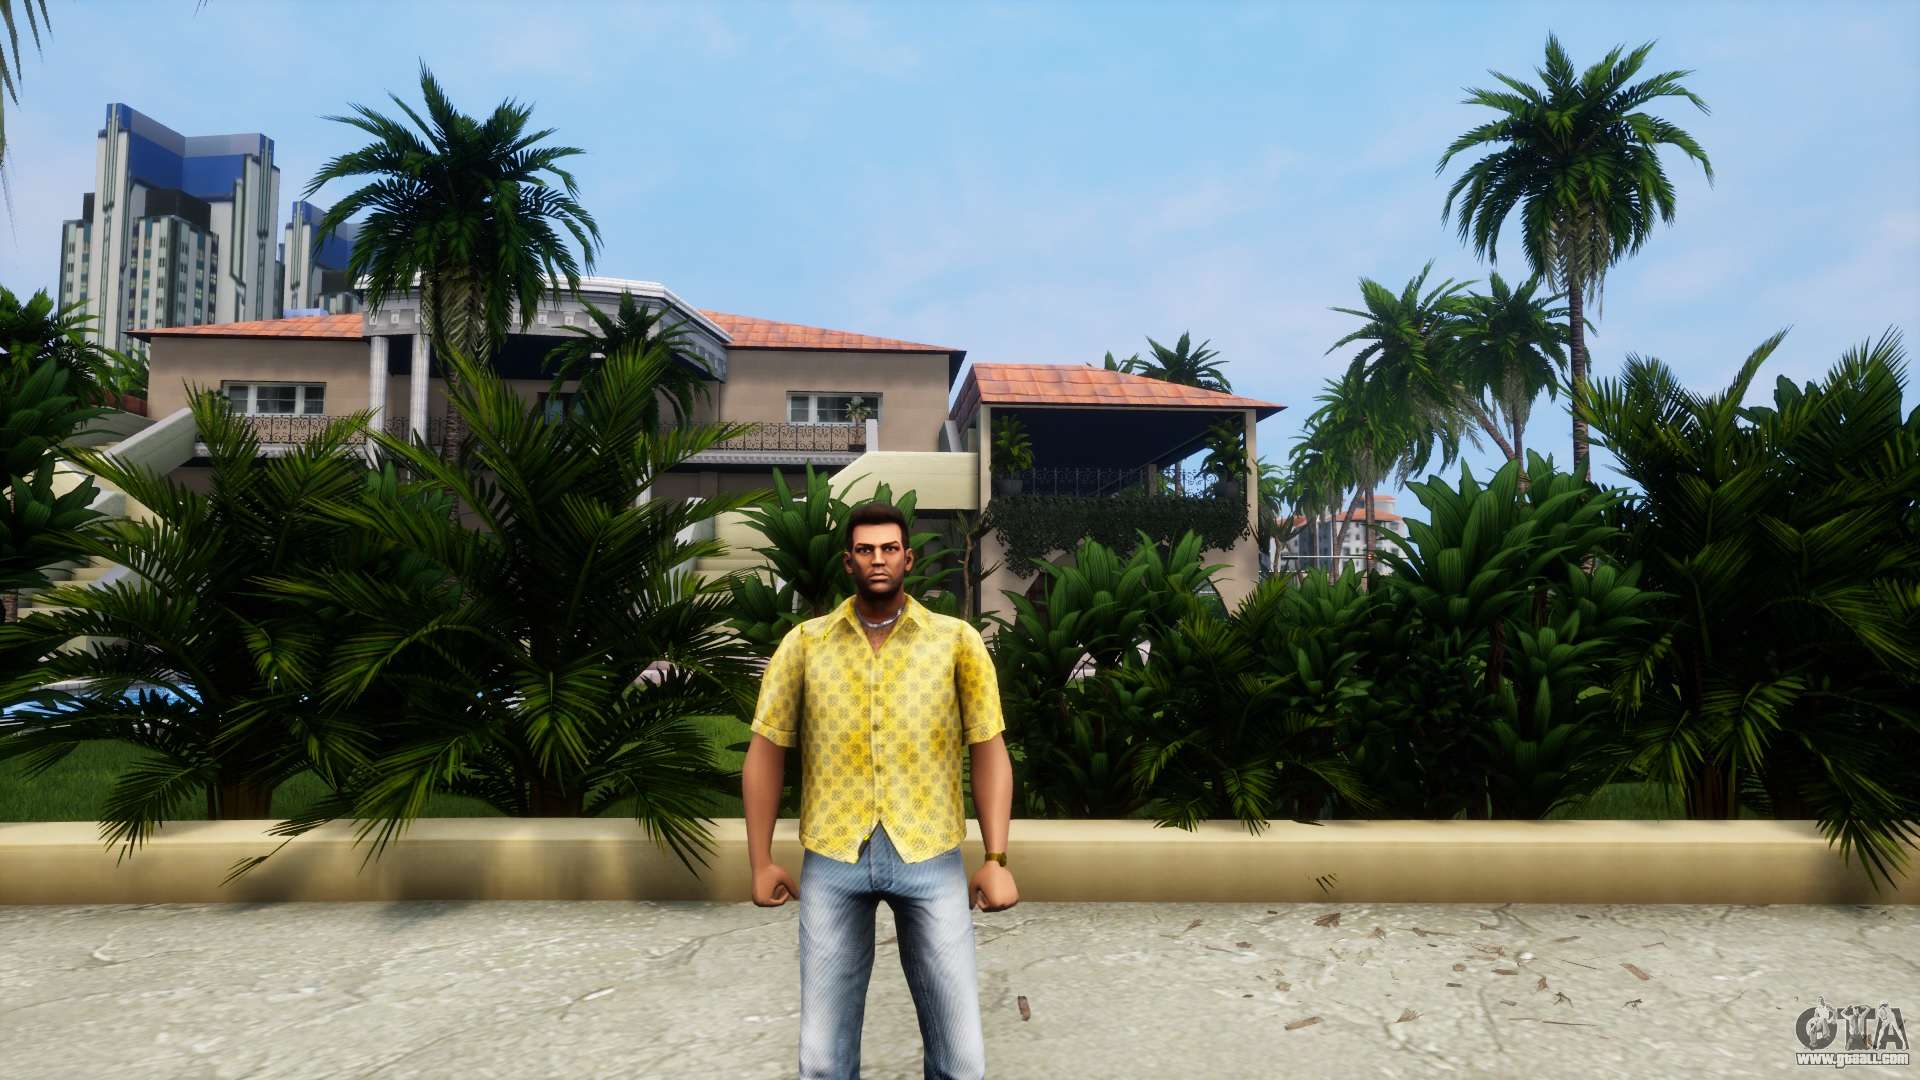 Golden Shirt and Light Blue Jeans v1 for GTA Vice City Definitive Edition